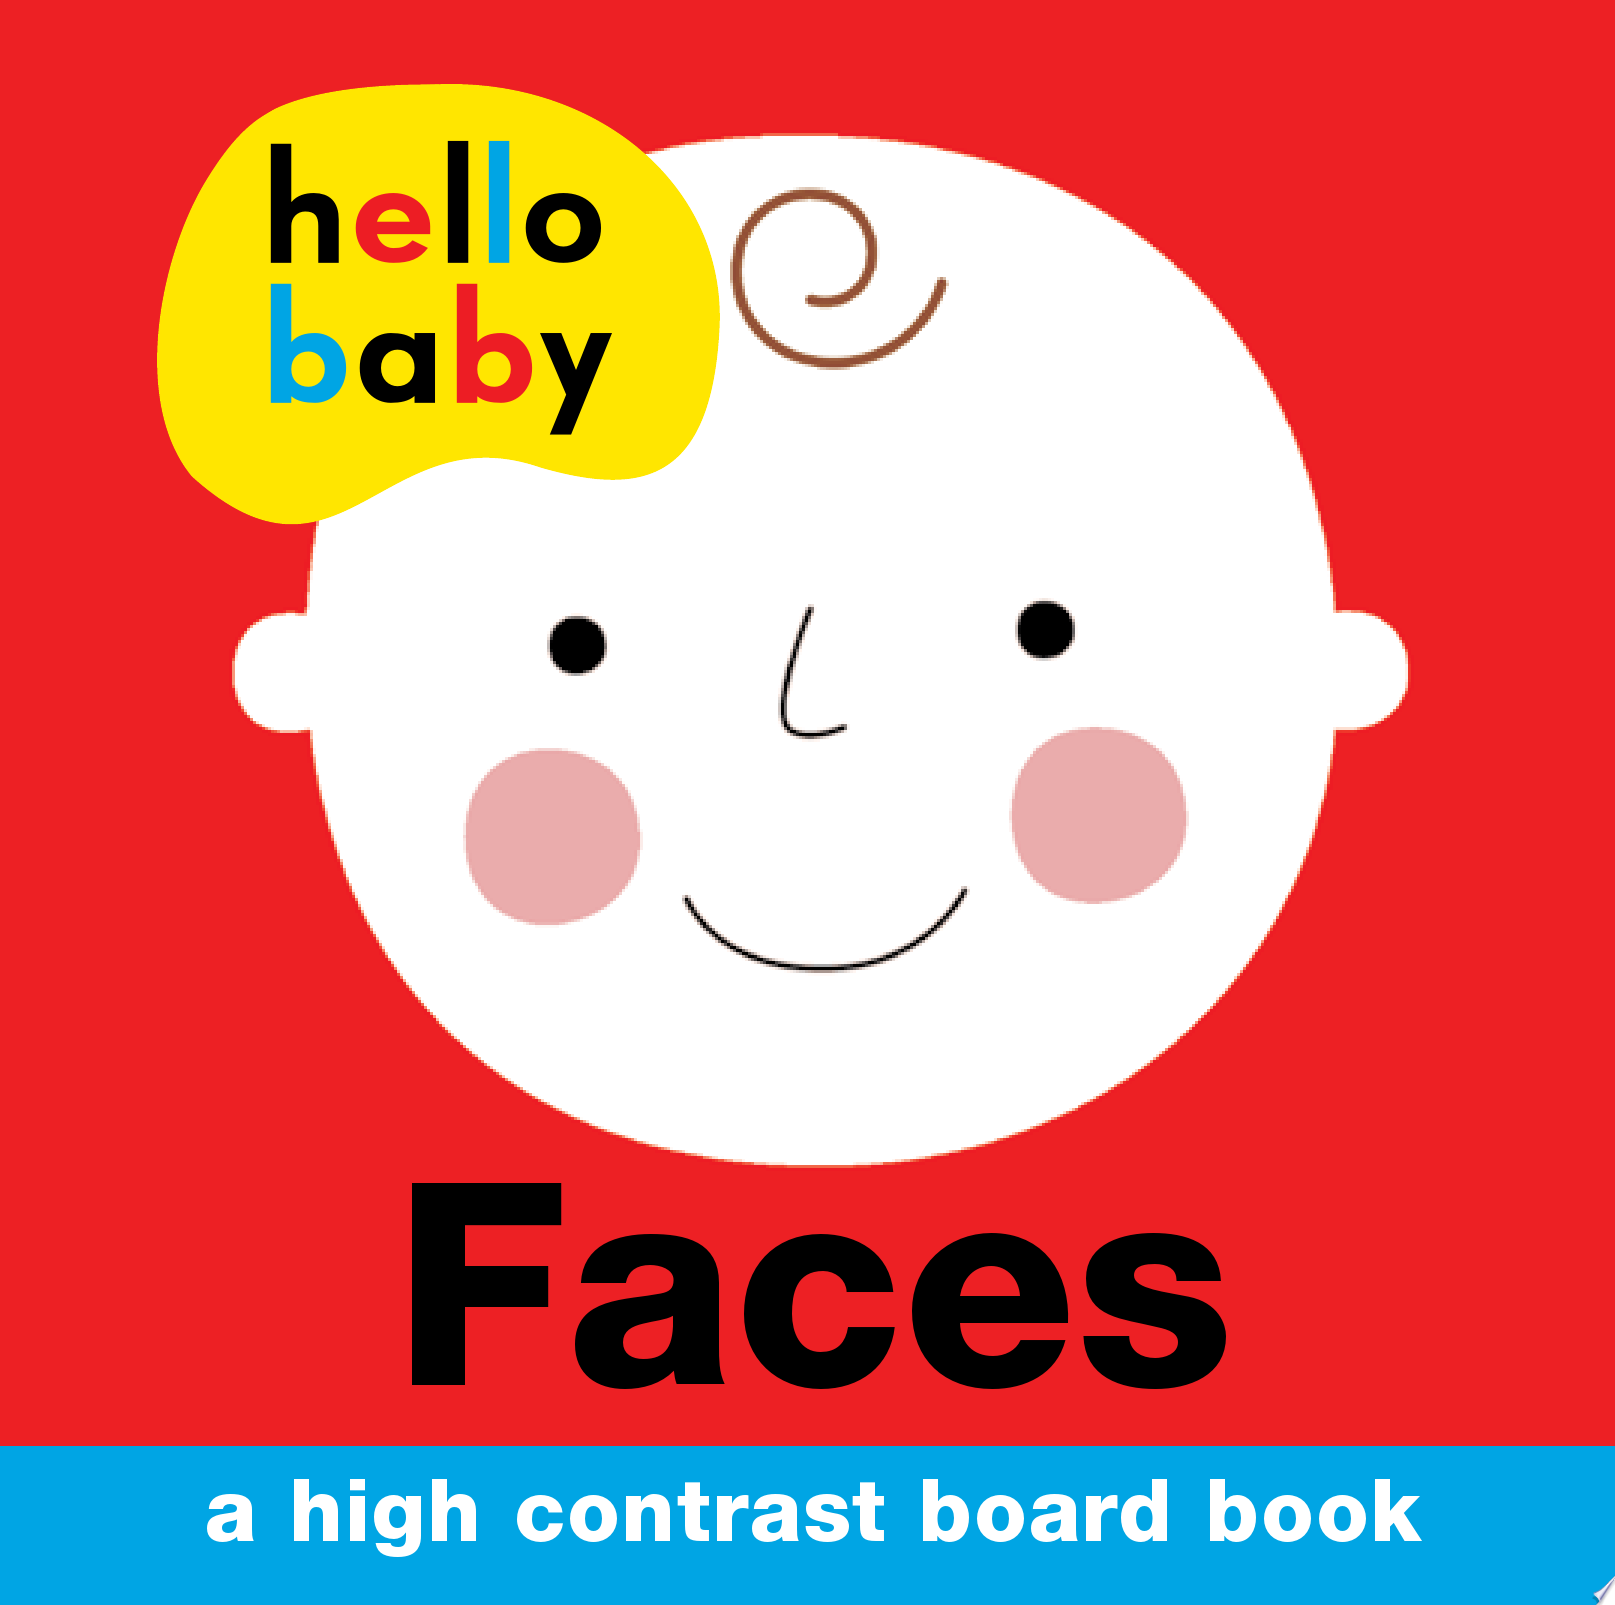 Image for "Hello Baby: Faces"